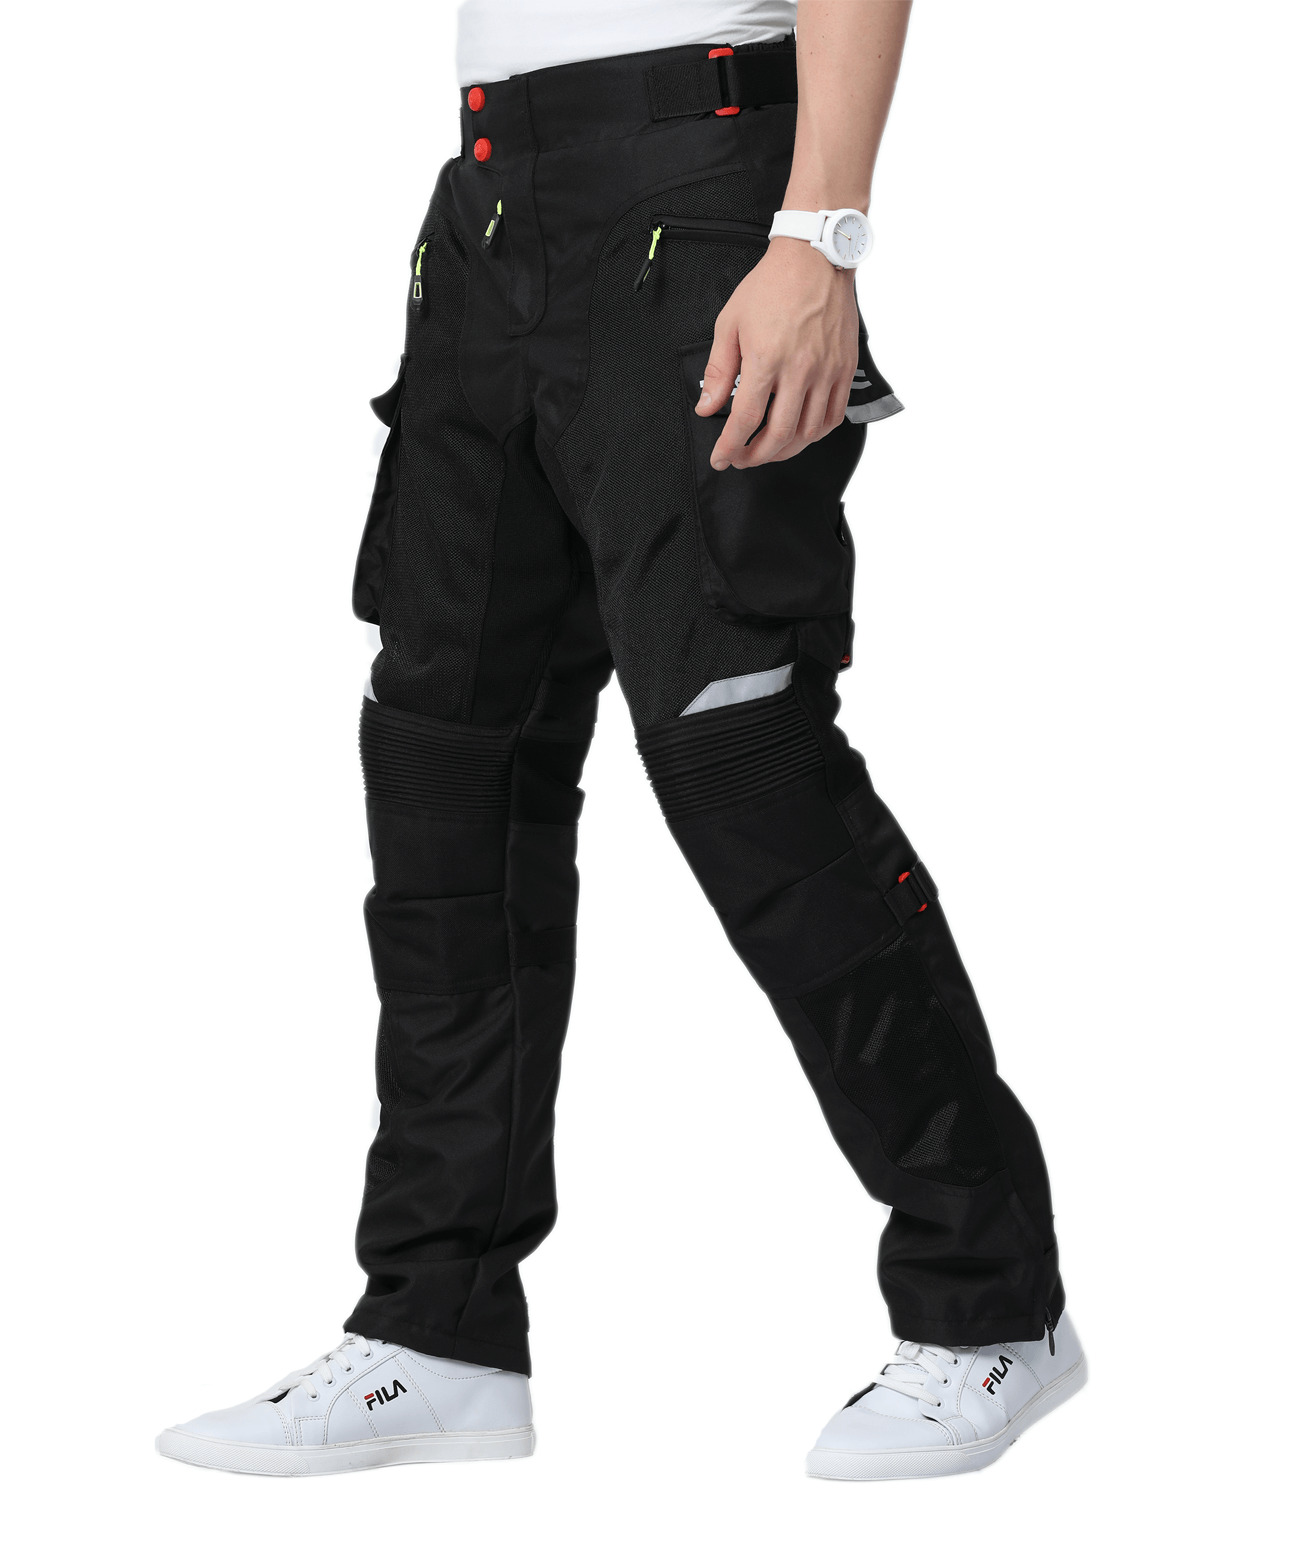 COOLPRO PANT BLACK SIDE